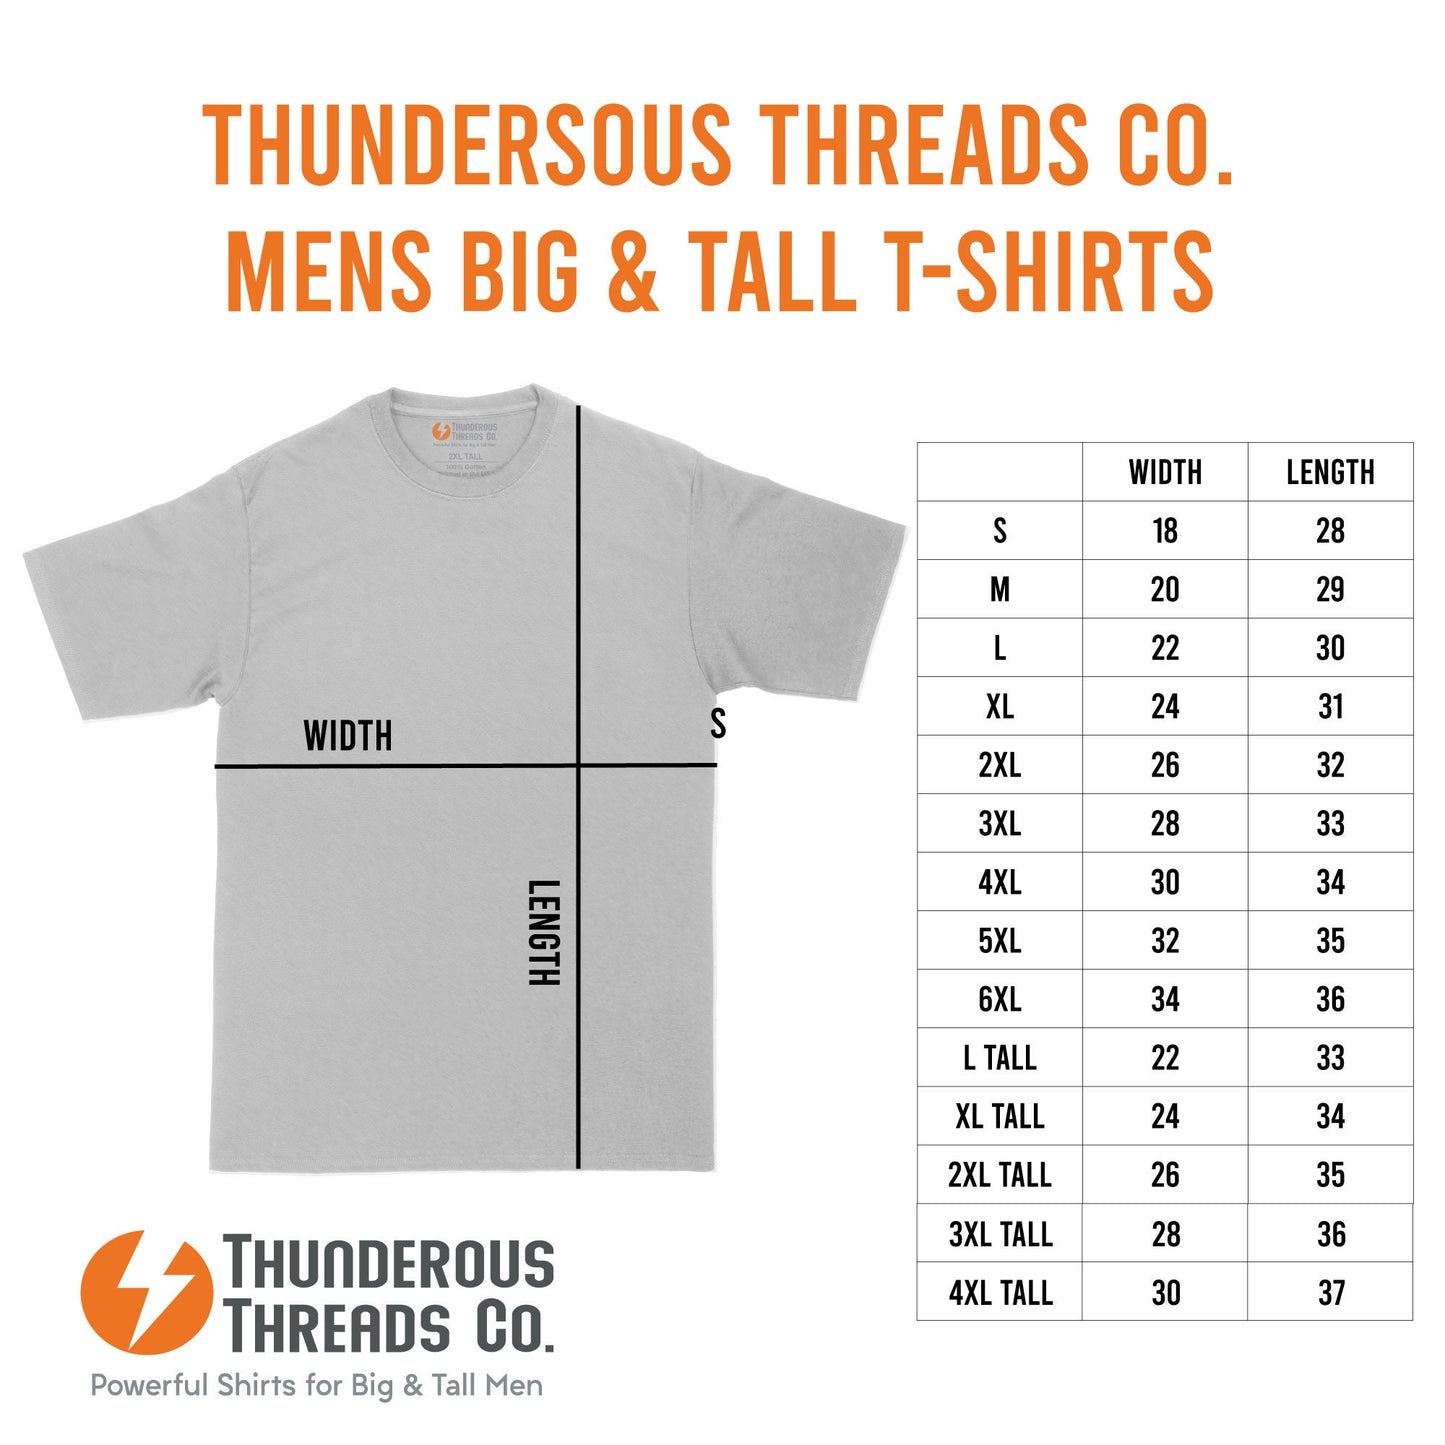 Beer and BBQ | Mens Big and Tall T-Shirt